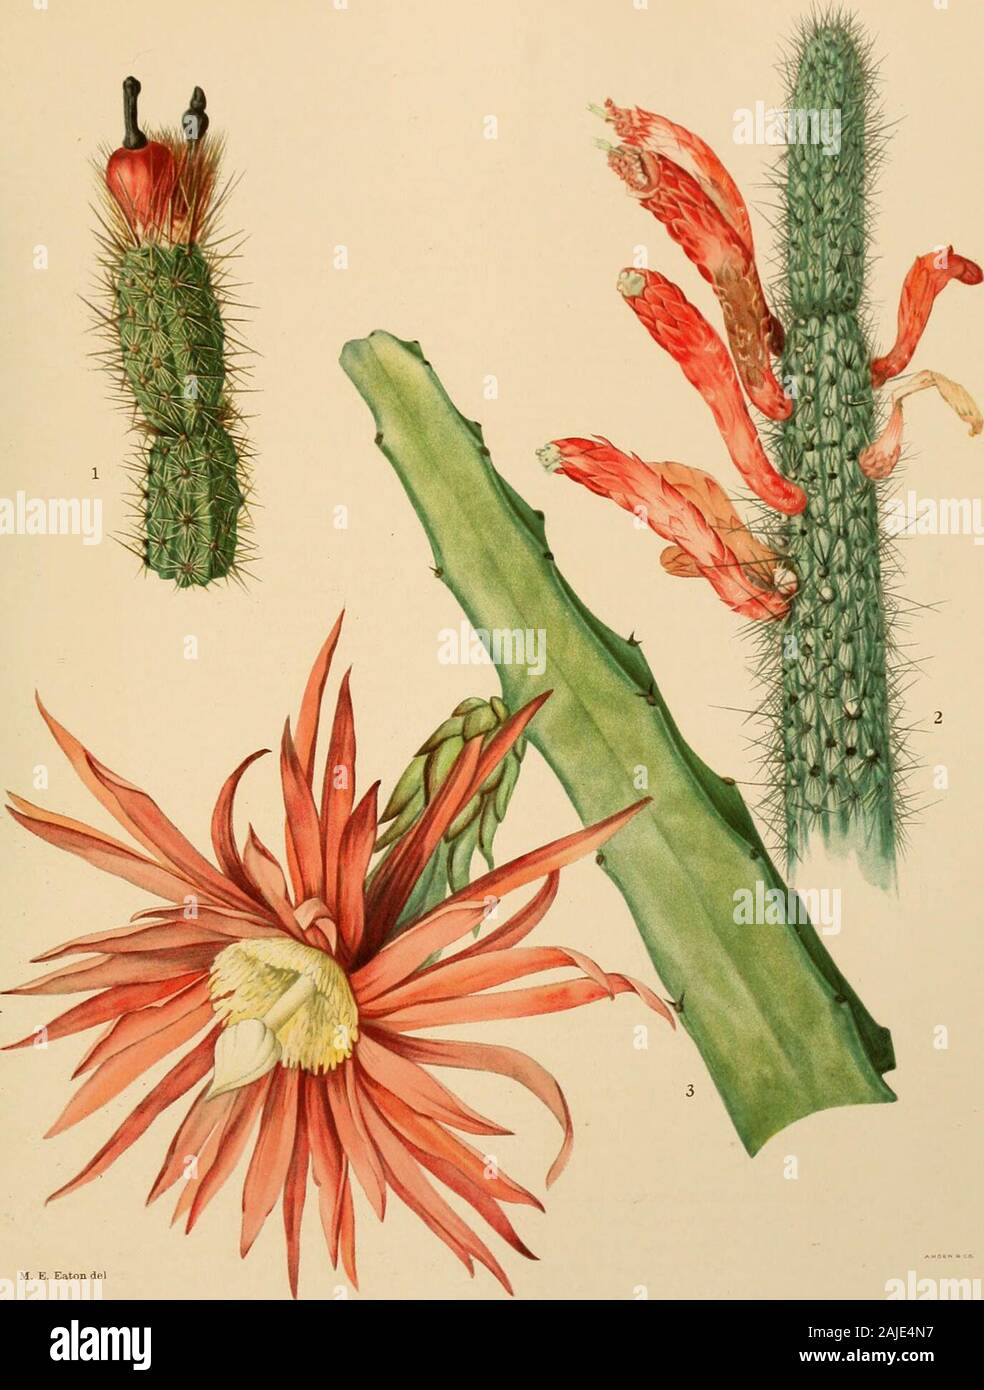 The Cactaceae : descriptions and illustrations of plants of the cactus family . BRITTON AND ROSE, VOL. II. 1. End of fruiting branch of Arrojadoa rhodantha. 2. Top of plant of Cleistocactus baumannii. 3. Flower on branch of Hylocereus stenopterus. (All natural size.) HYLOCEREUS. 185 bottom of each undulation; spines 5 to 8, acicular, 5 to 12 111111. long; flowers 25 to 30 cm. long andfully as broad; outer perianth-segments narrow, long-acuminate, greenish, spreading or reflexed;inner perianth-segments oblong, acuminate, white; style stout; stigma-lobes linear, entire, green;ovary covered with Stock Photo